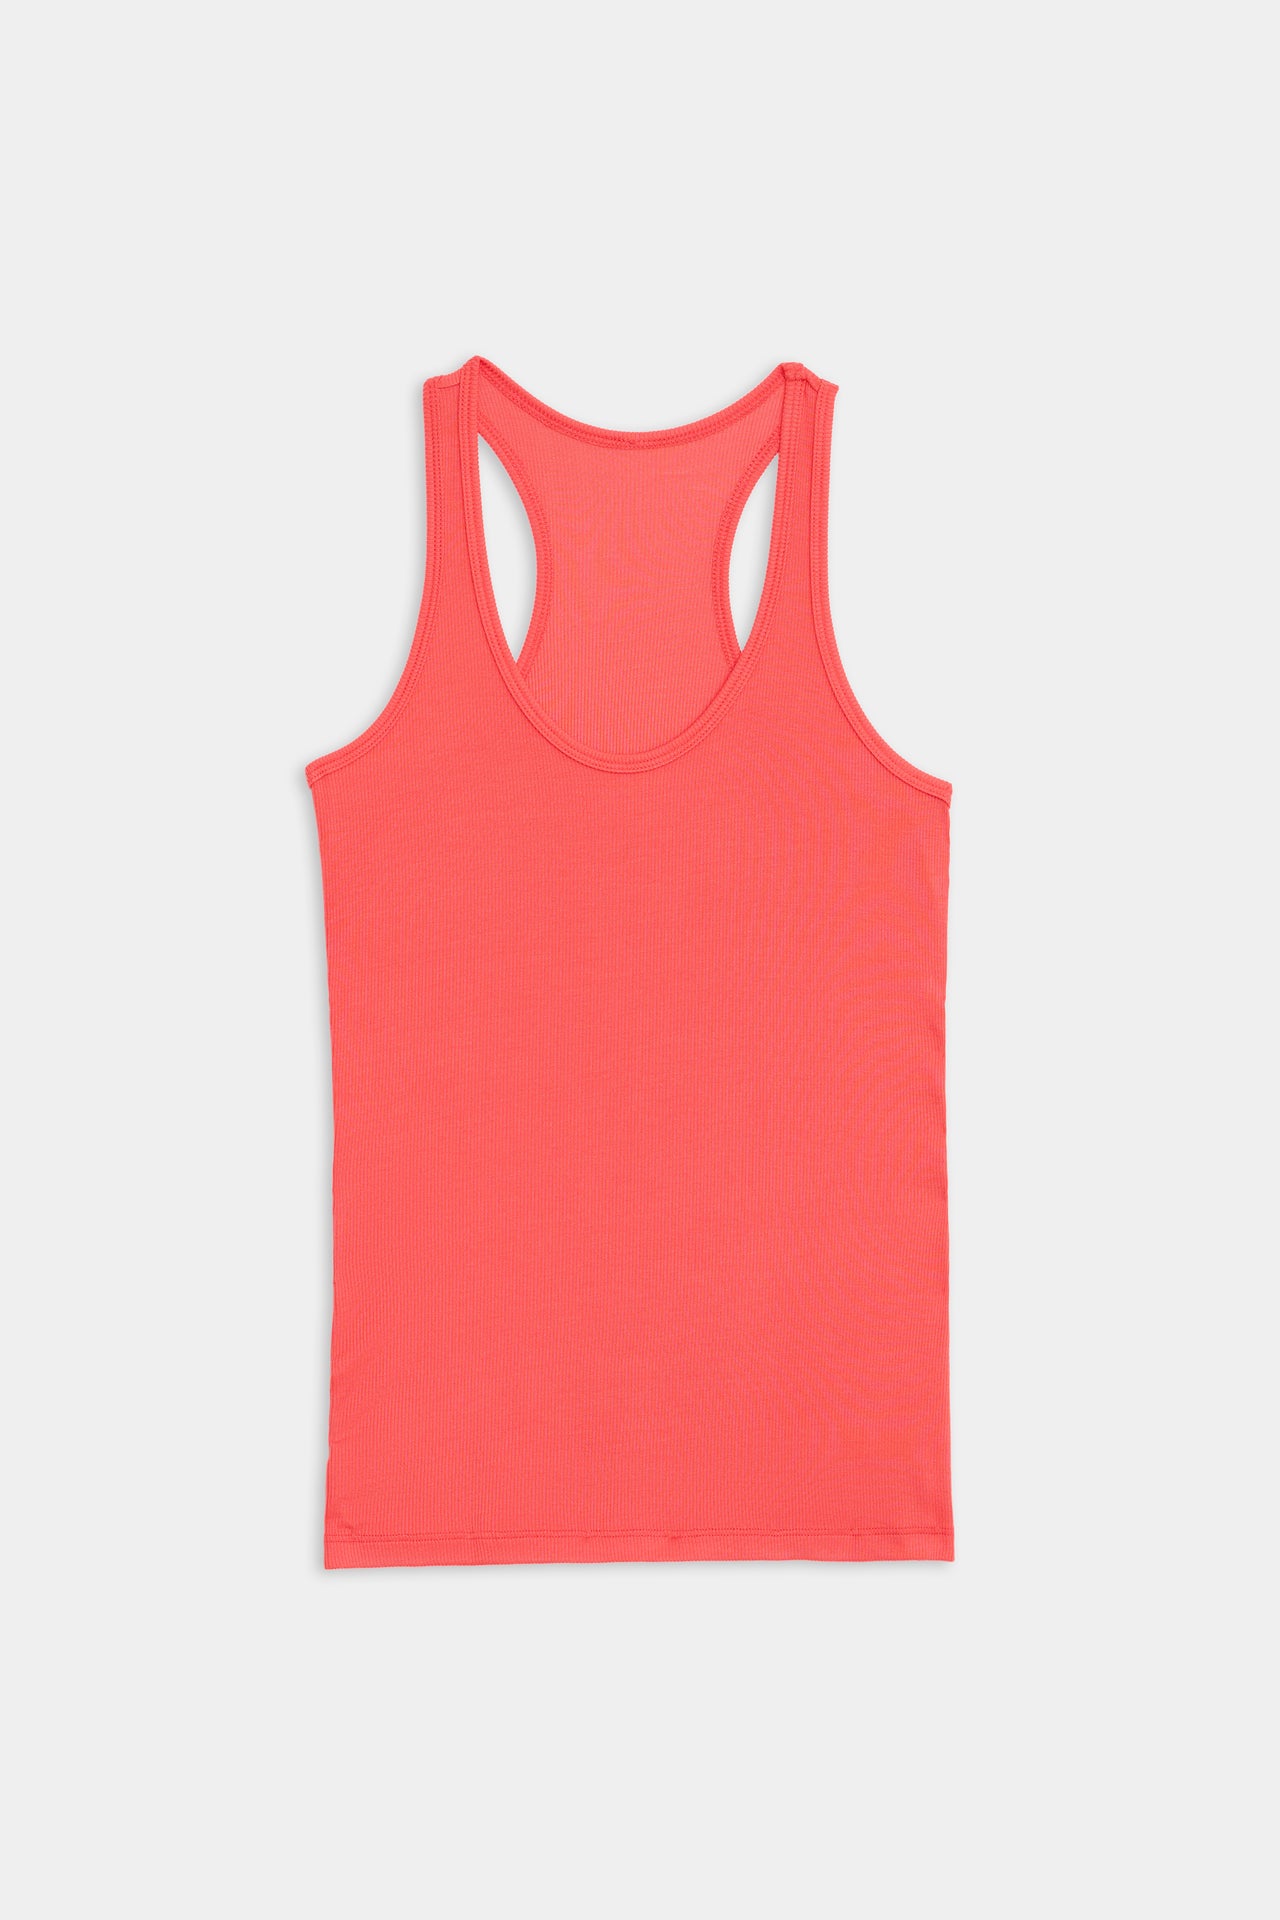 Bright orange sleeveless top from the SPLITS59 Ashby Trio Bundle displayed on a plain background.